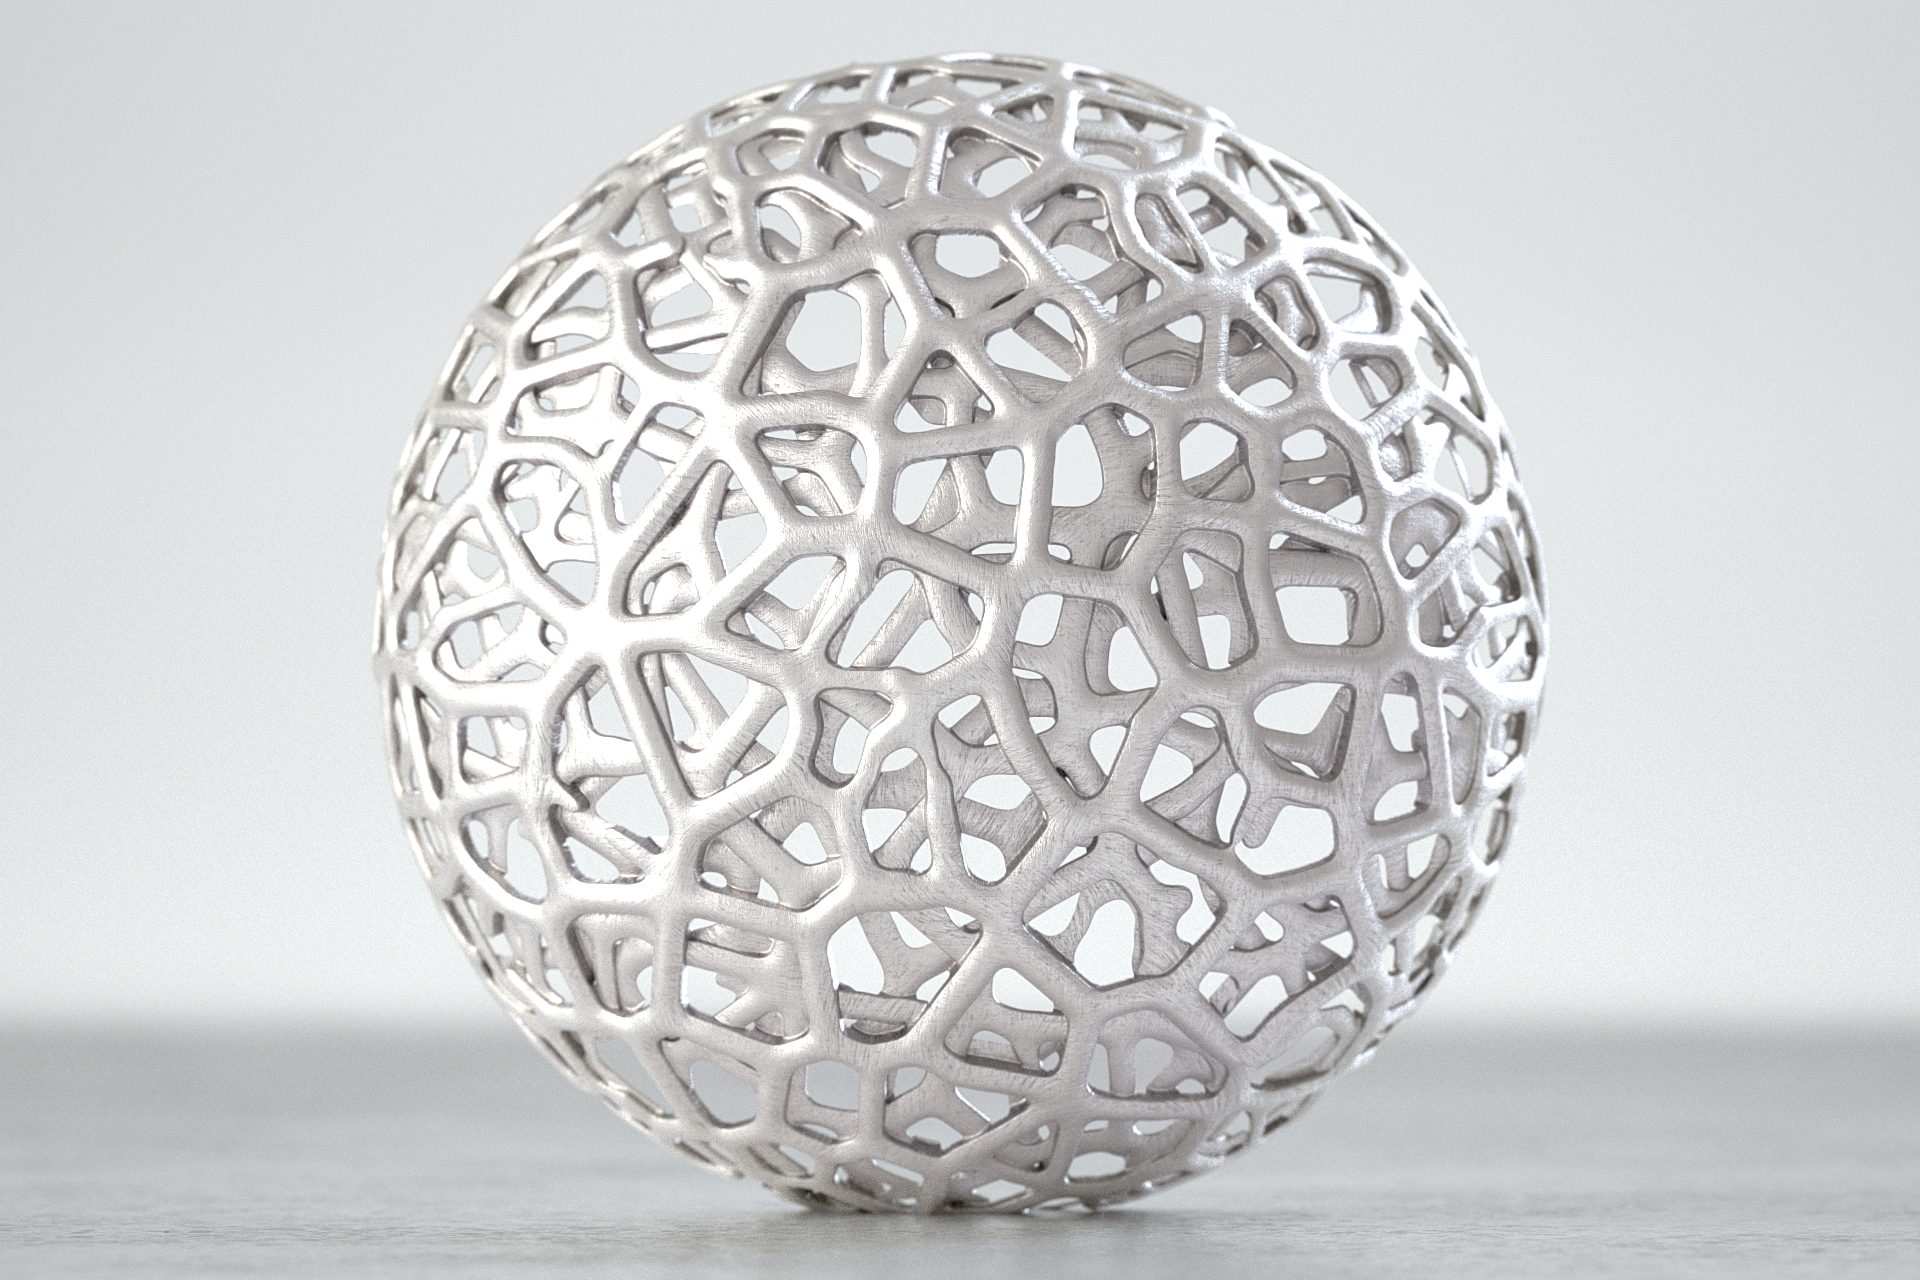 new-materials-to-help-visualize-3d-printed-objects-released